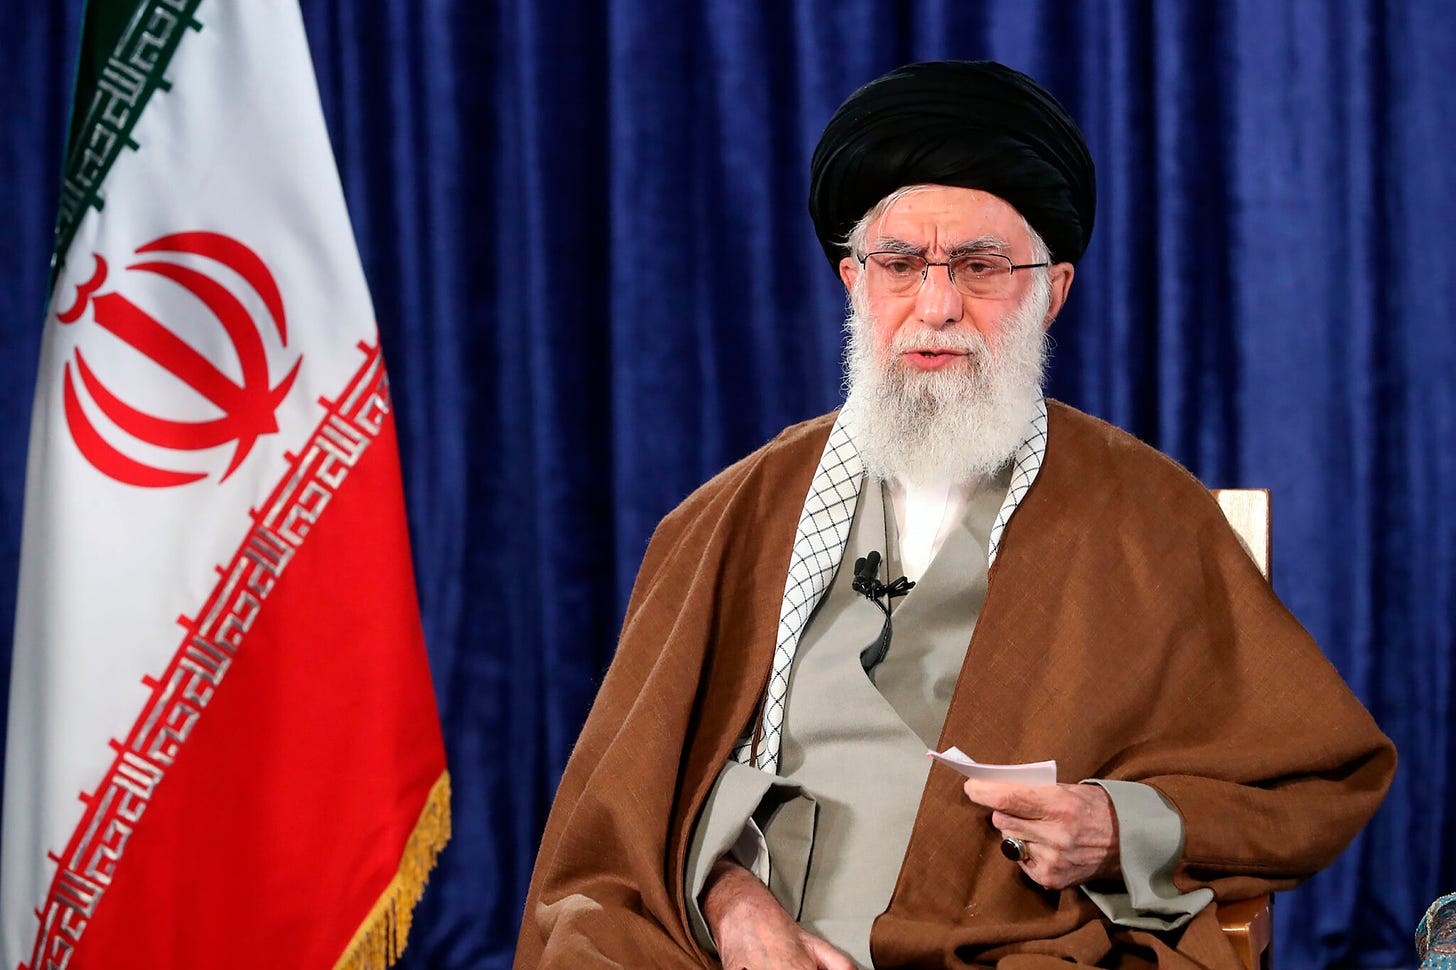 On Quds Day, Iran's leader says Zionism 'a virus that must be ...